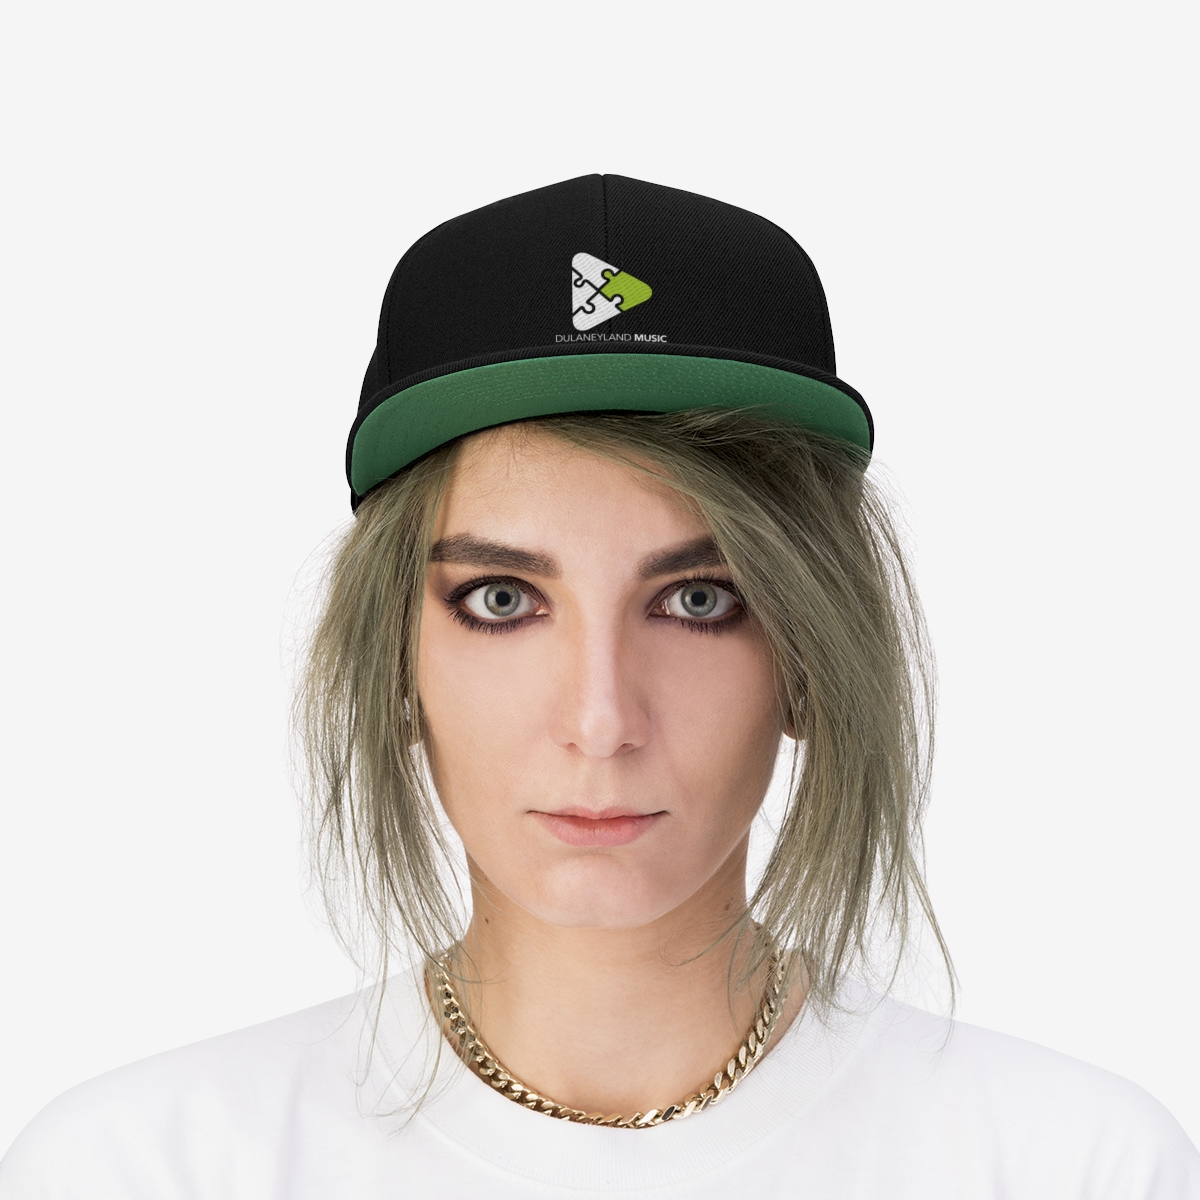 Copy of The Journey Continues Tour Snapback product thumbnail image